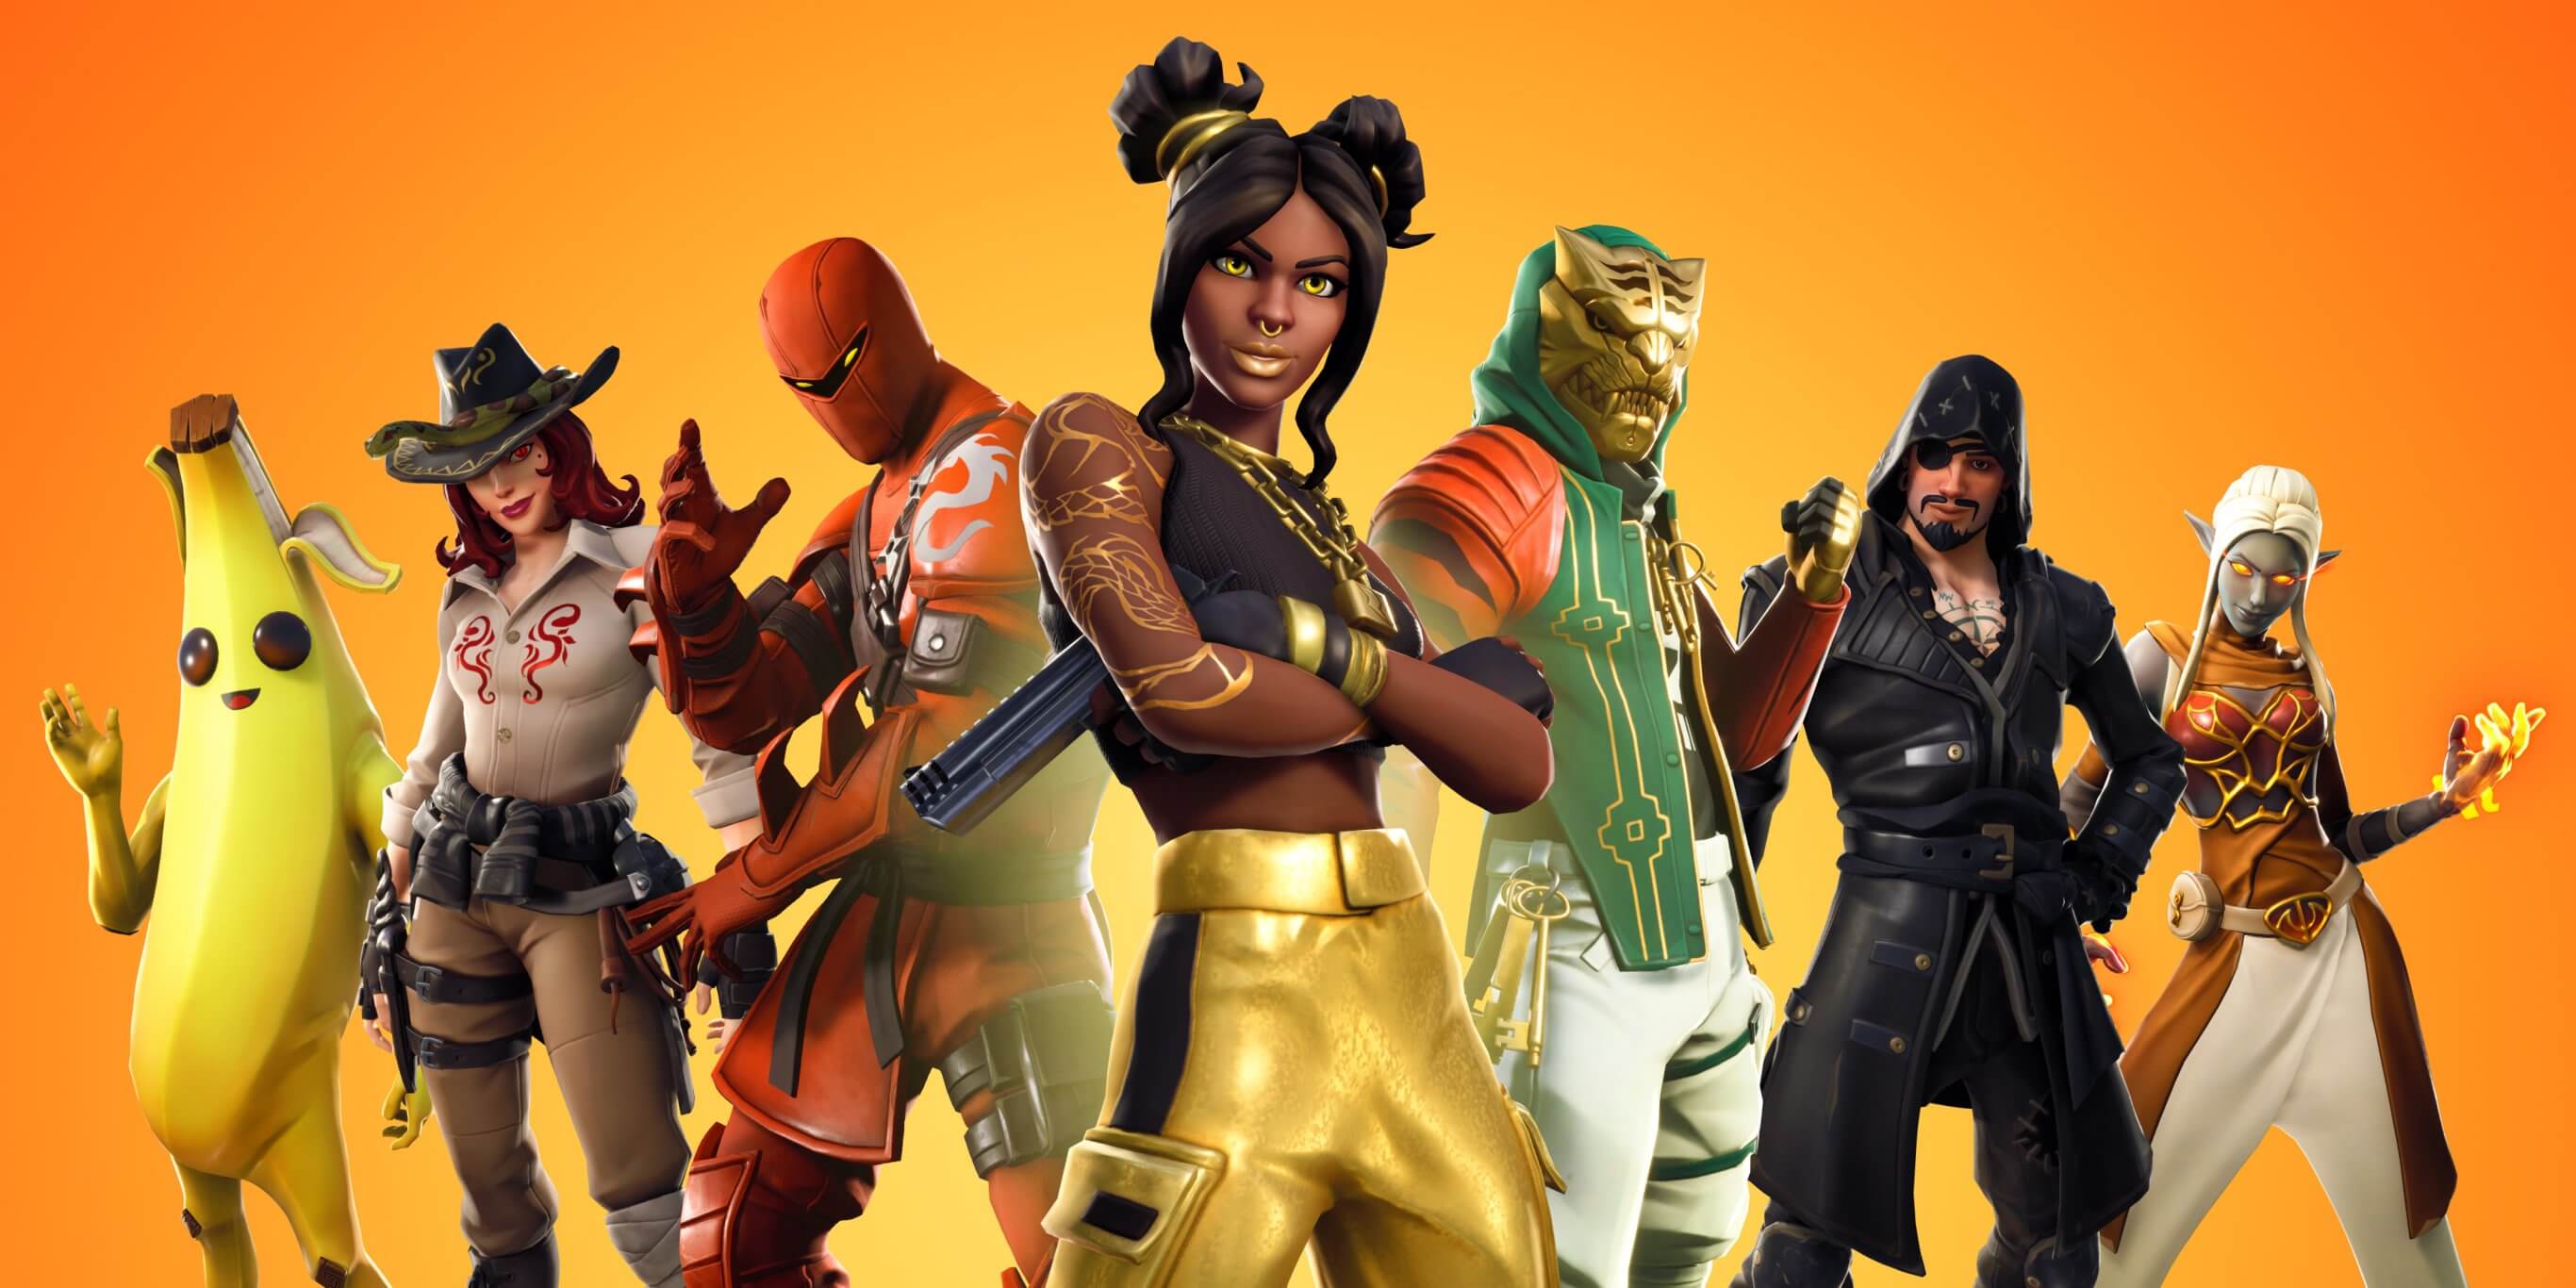 How Fortnite Became Popular - Colorful Characters and Graphics